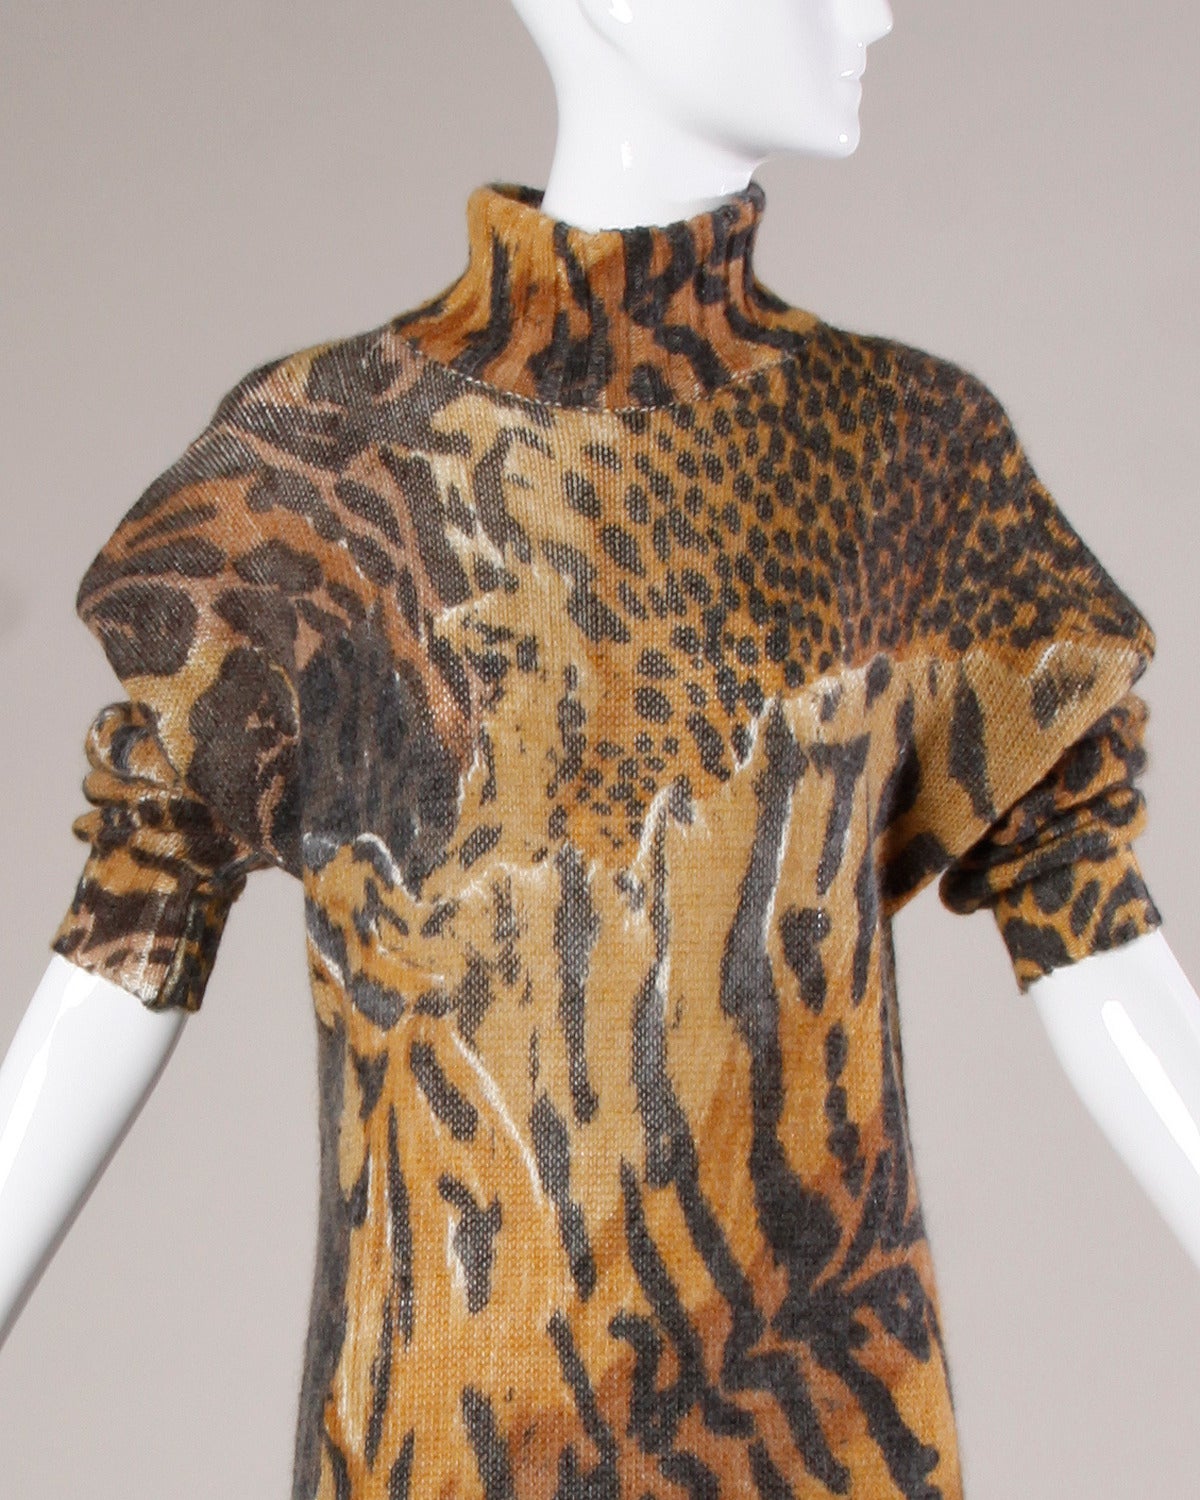 Iconic Krizia oversized knit tunic or jumper in animal print. 

Details:

Unlined
No Closure/ Fabric Contains Stretch
Marked Size: 44
Color: Burnt Umber/ Black/ White/ Copper
Fabric: Wool/ Mohair/ Acrylic/ Nylon
Label: Krizia